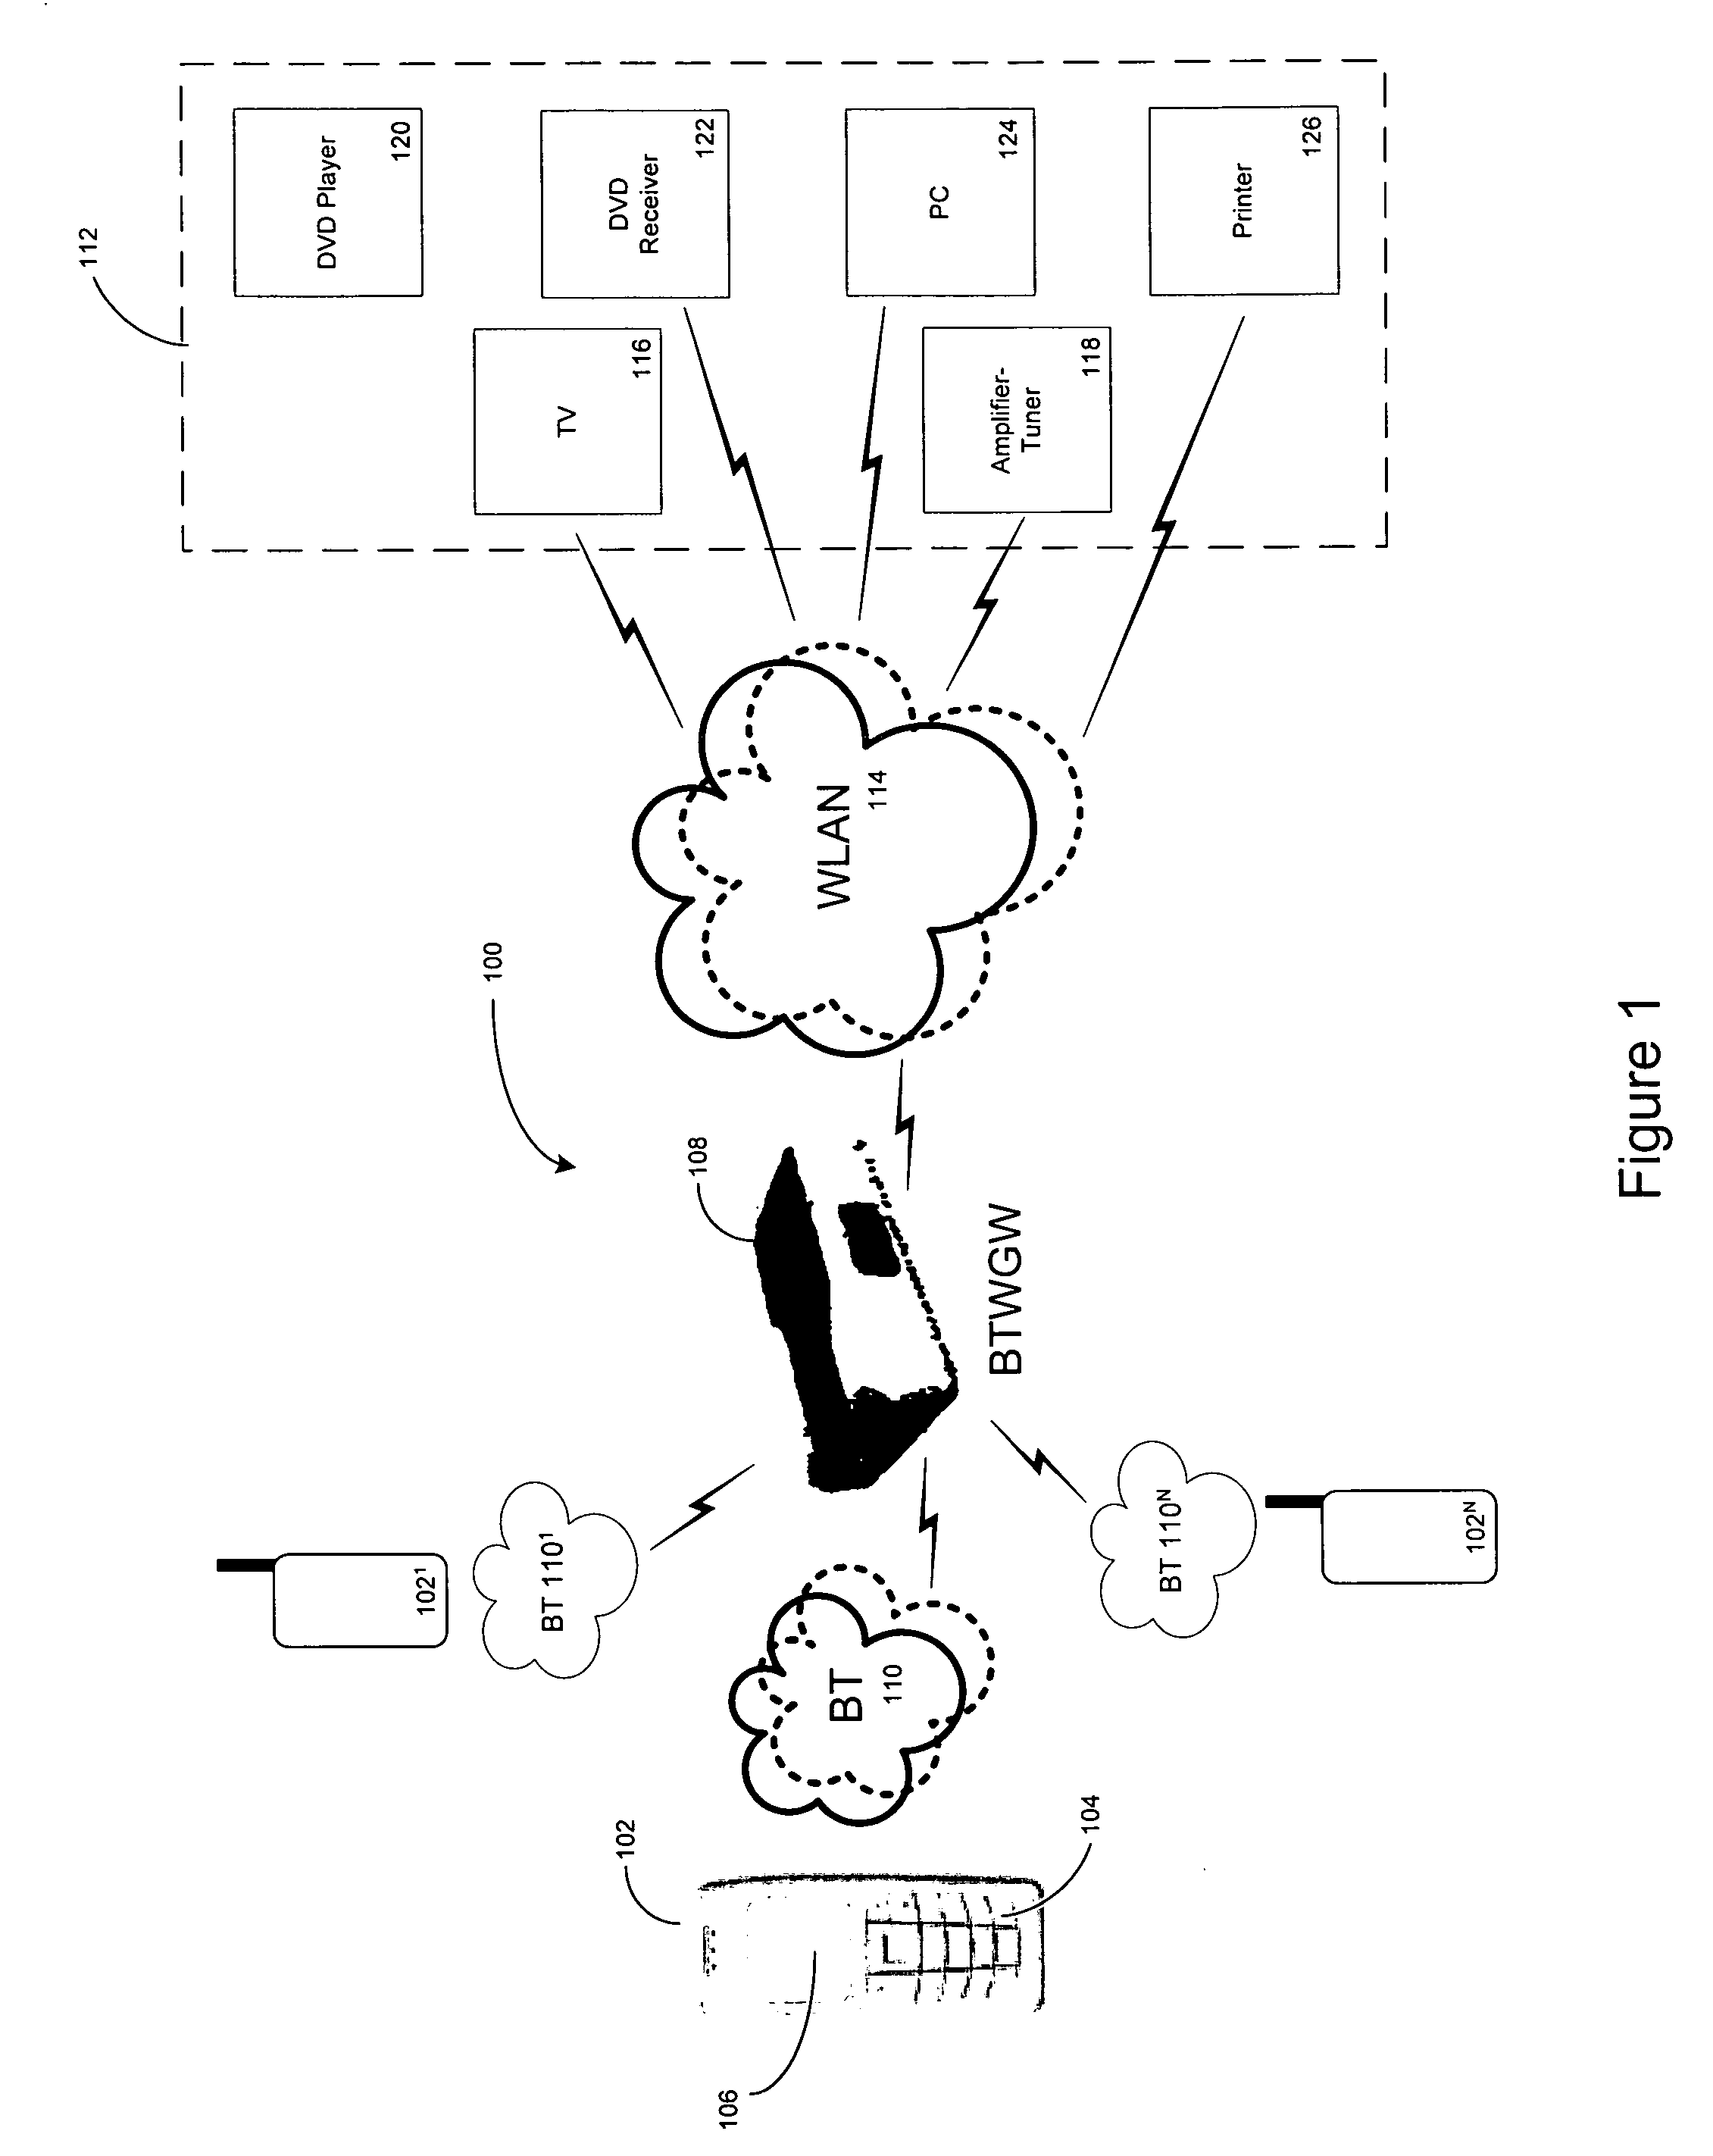 Wireless gateway for enabling wireless devices to discover and interact with various short-range services/devices